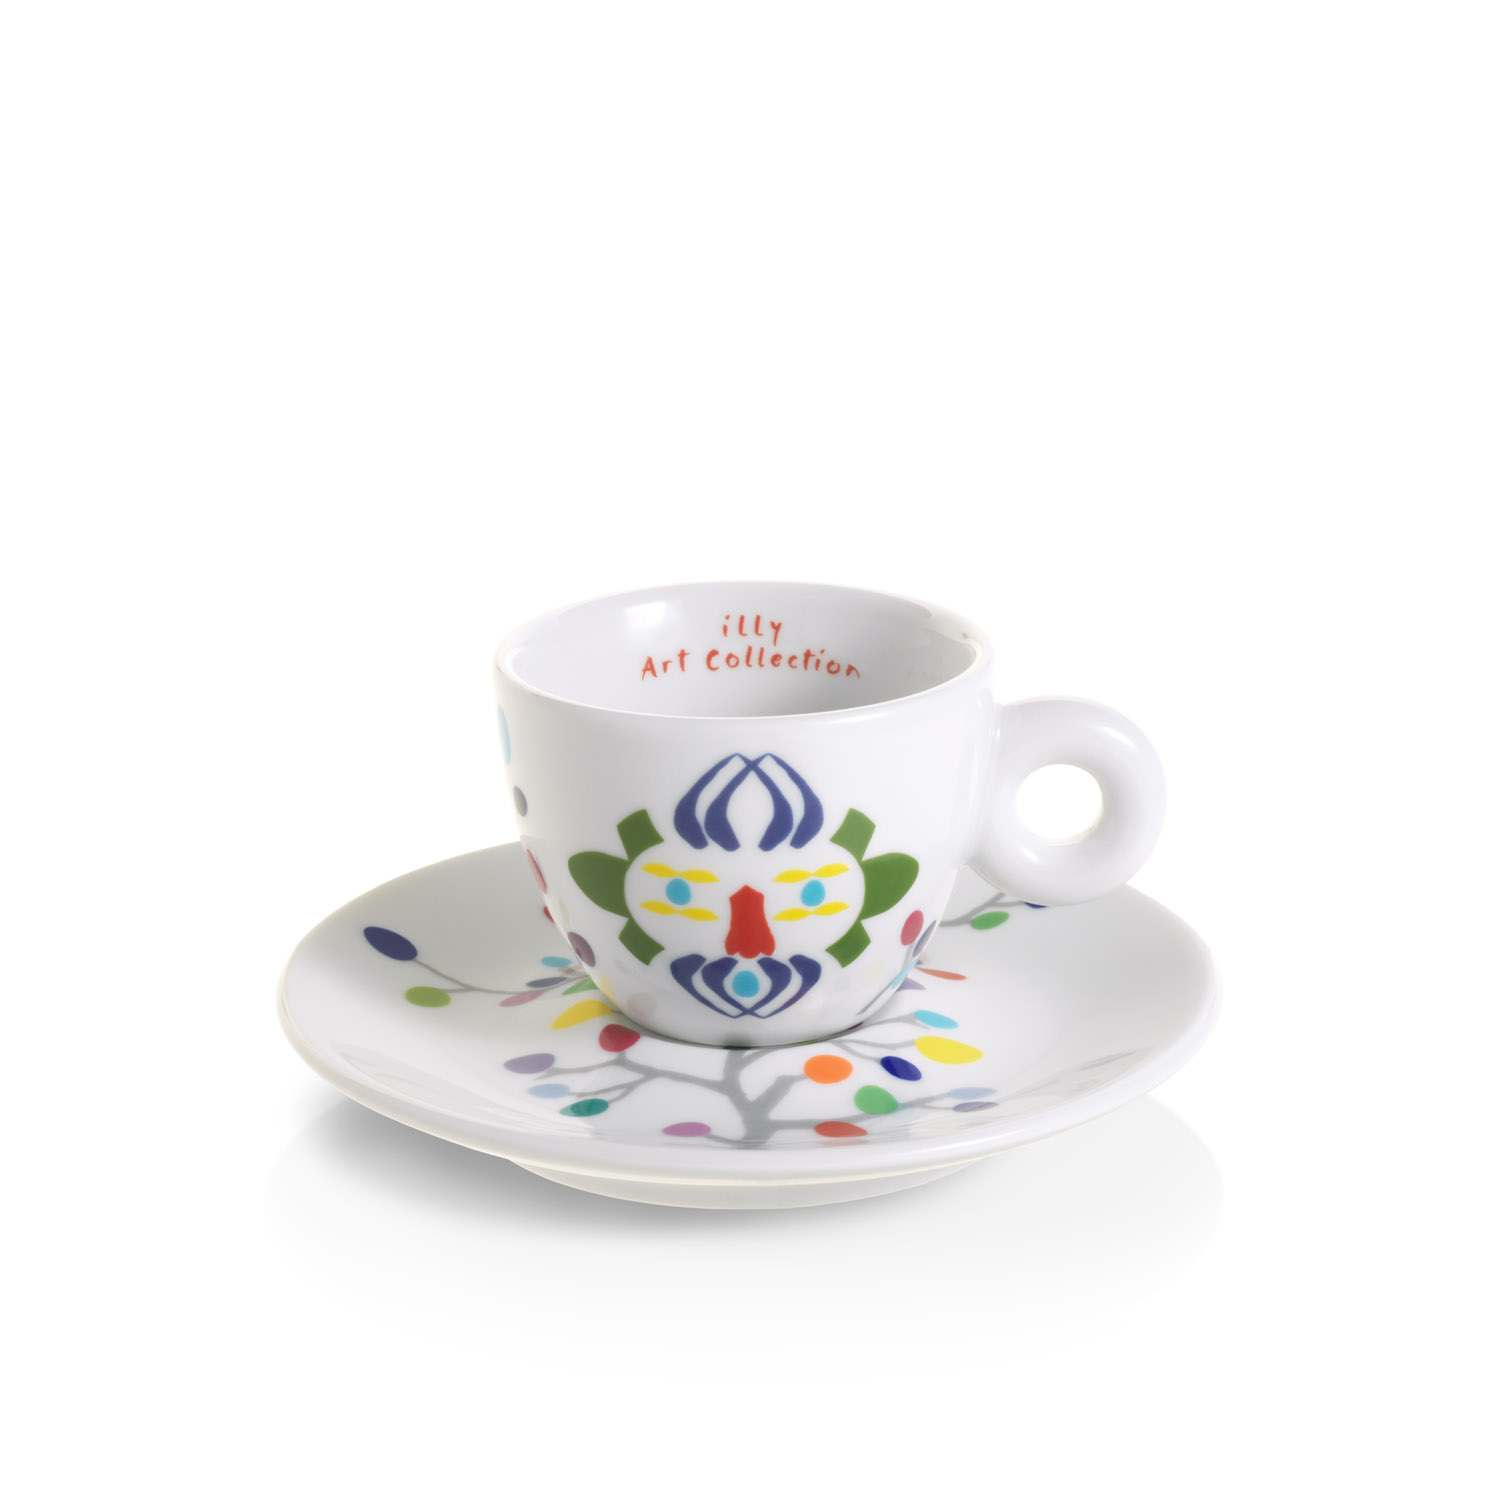 illy Art Collection PASCALE MARTHINE TAYOU Σετ Δώρου 2 Espresso Cups, Φλιτζάνια , 02-02-6088